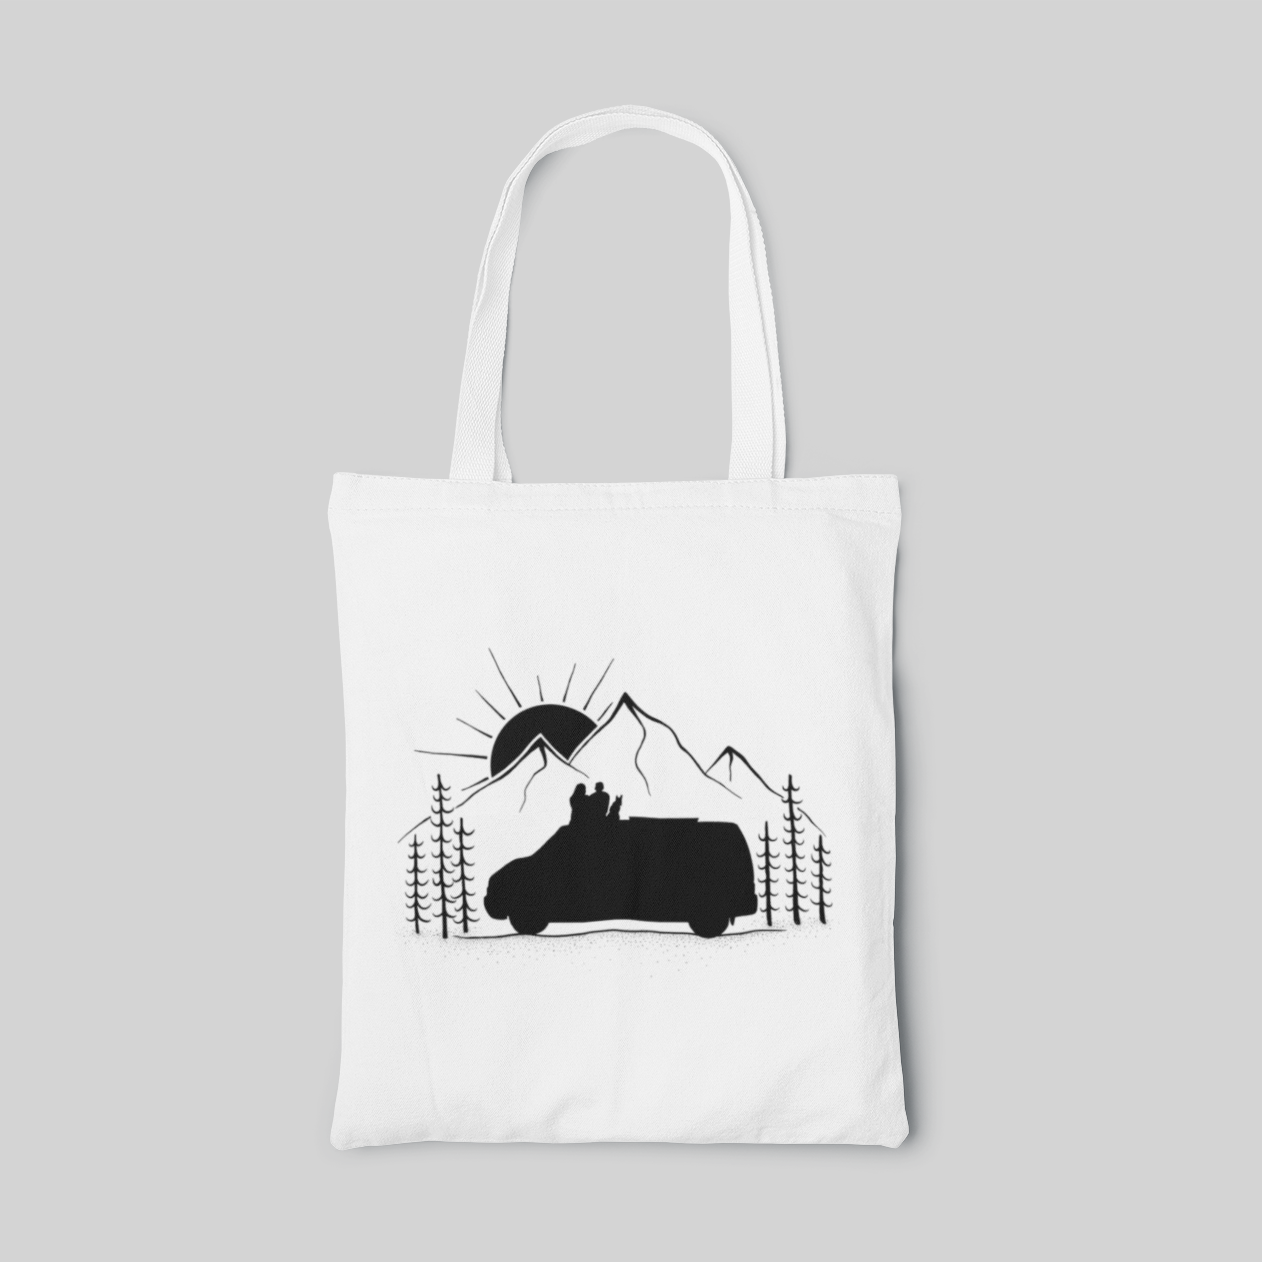 White minimalist designed tote bag with monochrome illustration of car next to mountains, a couple and a dog sitting on the car and watching the sun rise or set behind the mountain, front side